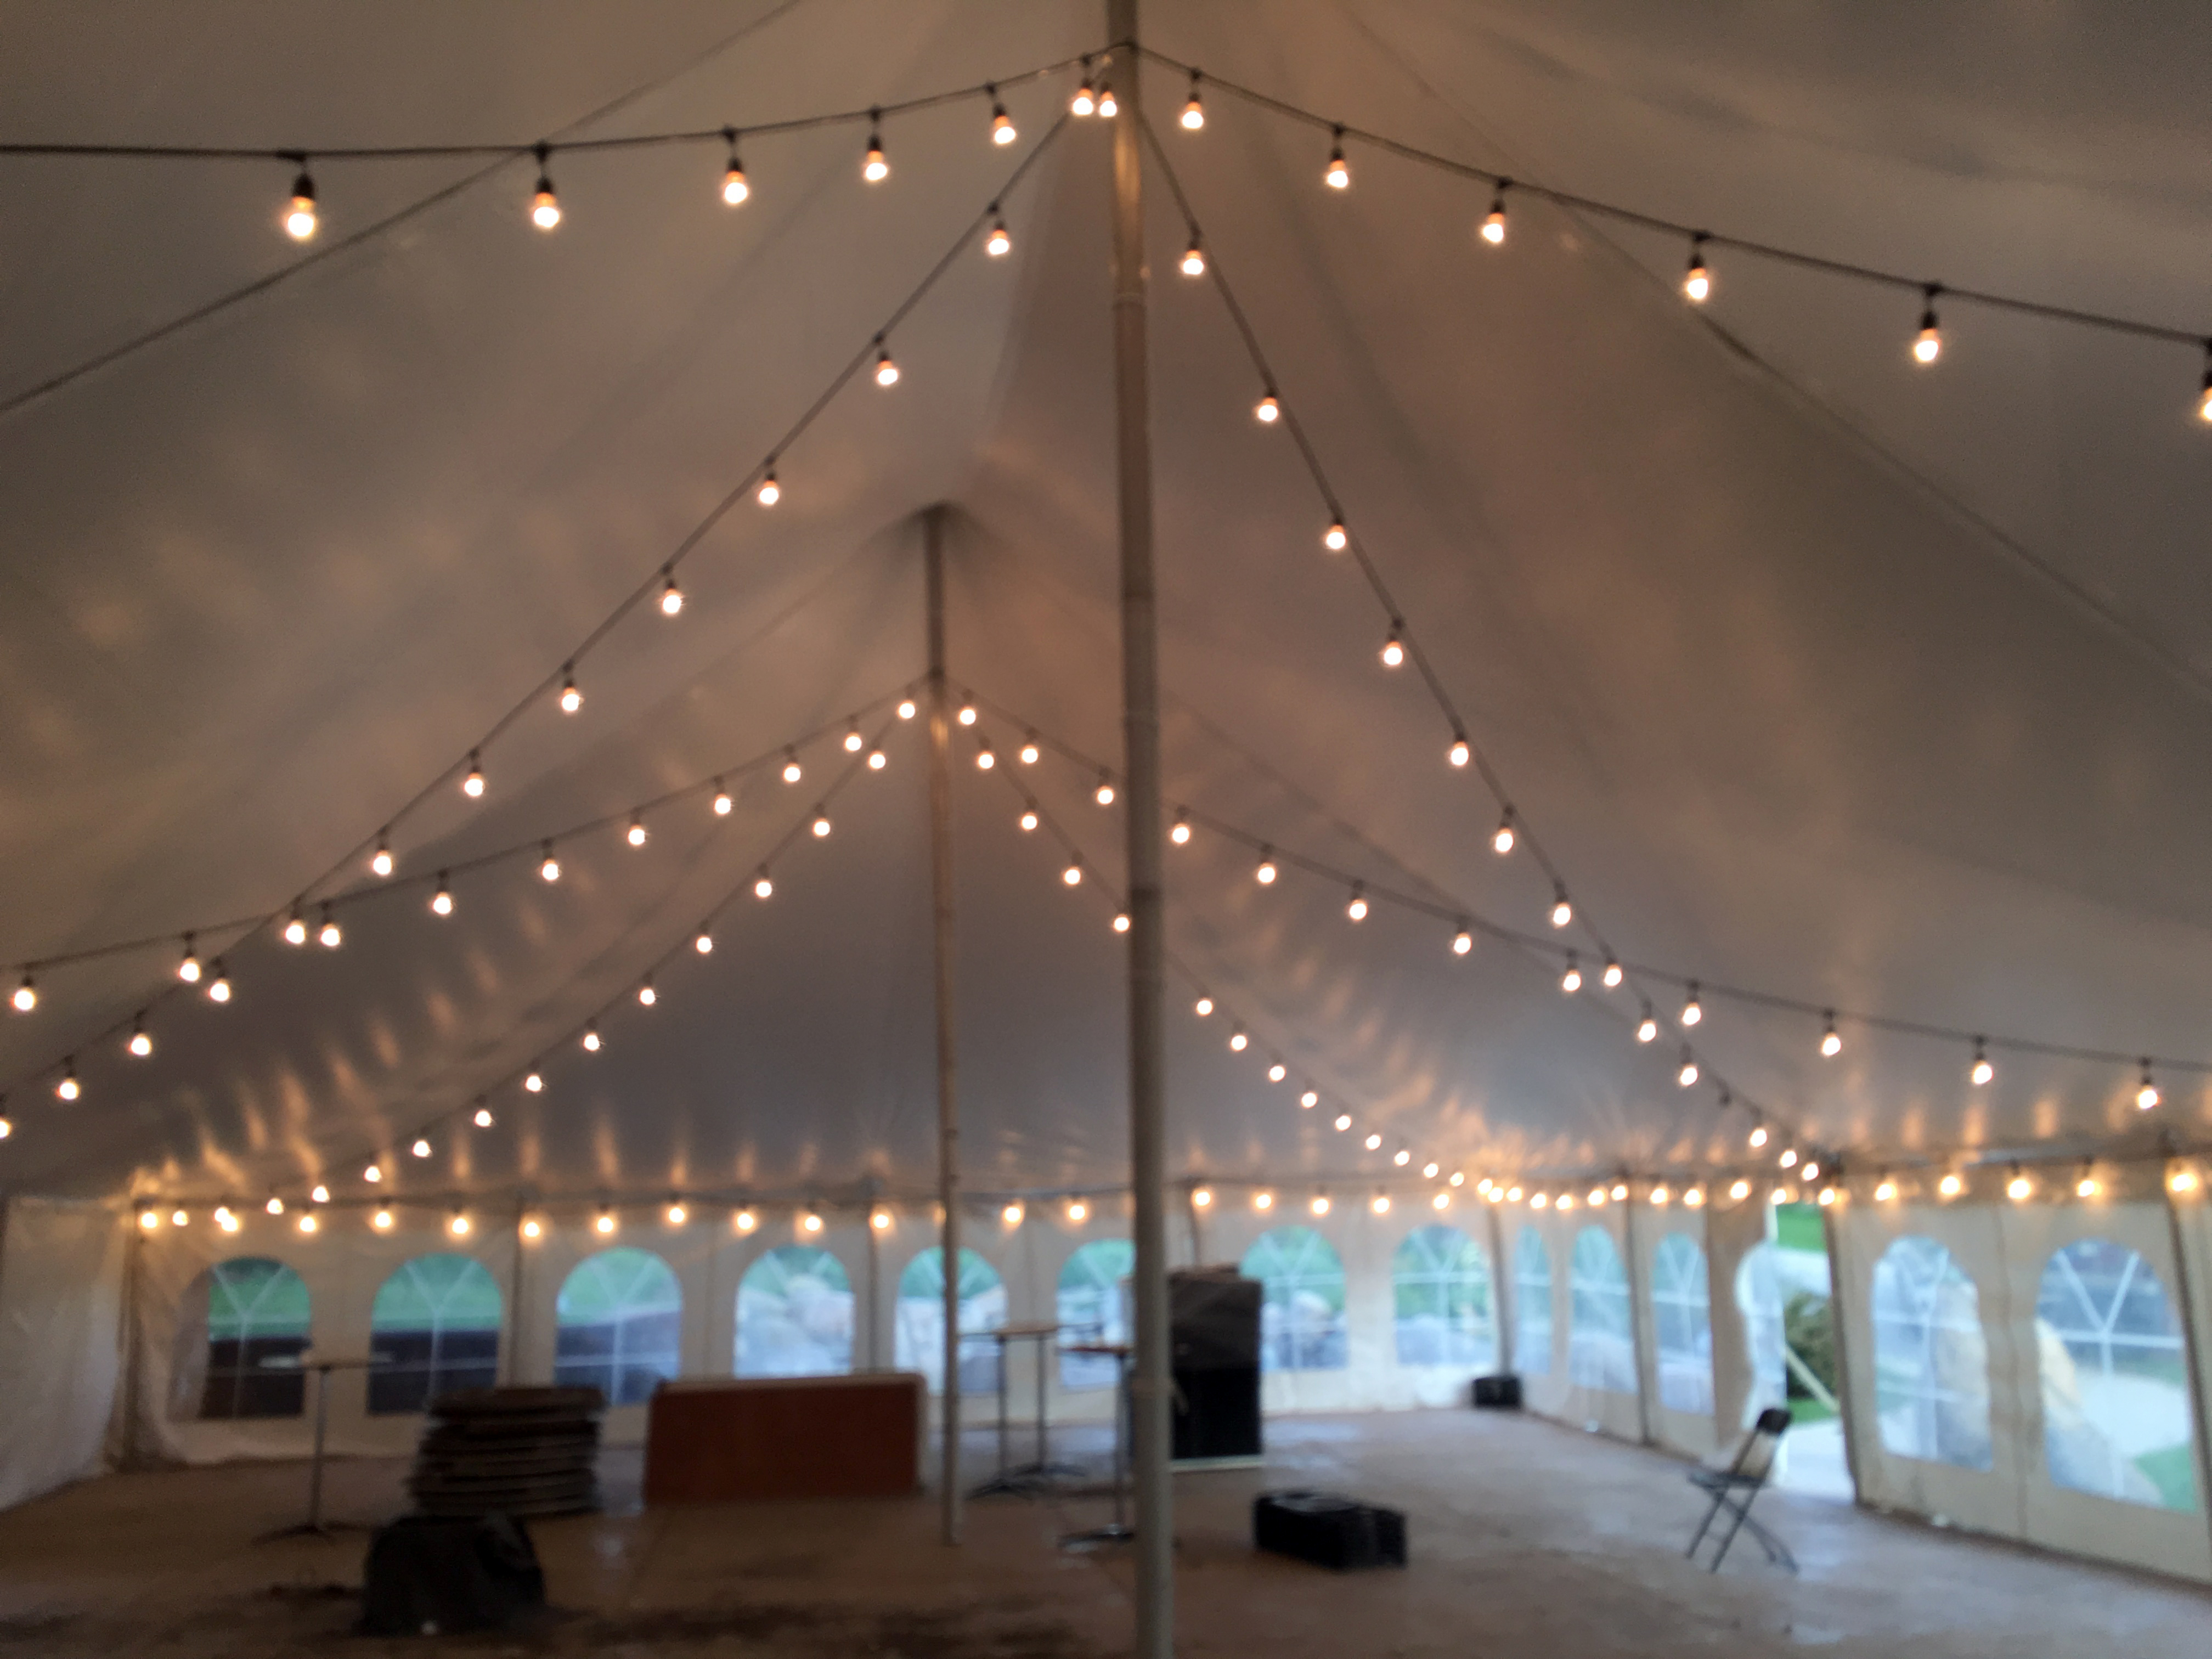 Under 40' x 60' white rope and pole wedding tent at Harvest Preserve with lights